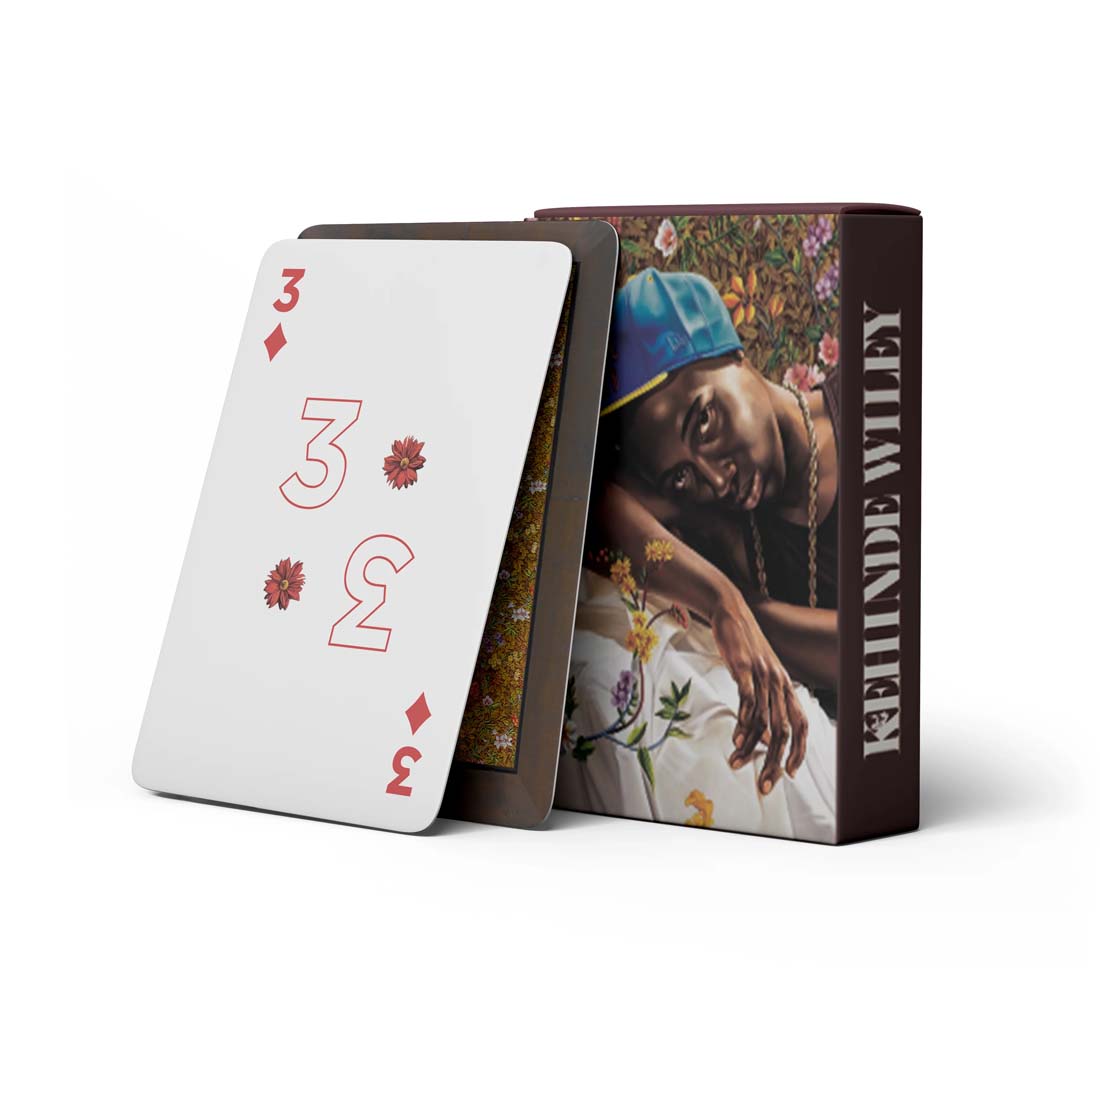 Kehinde Wiley Morpheus Deck of Cards